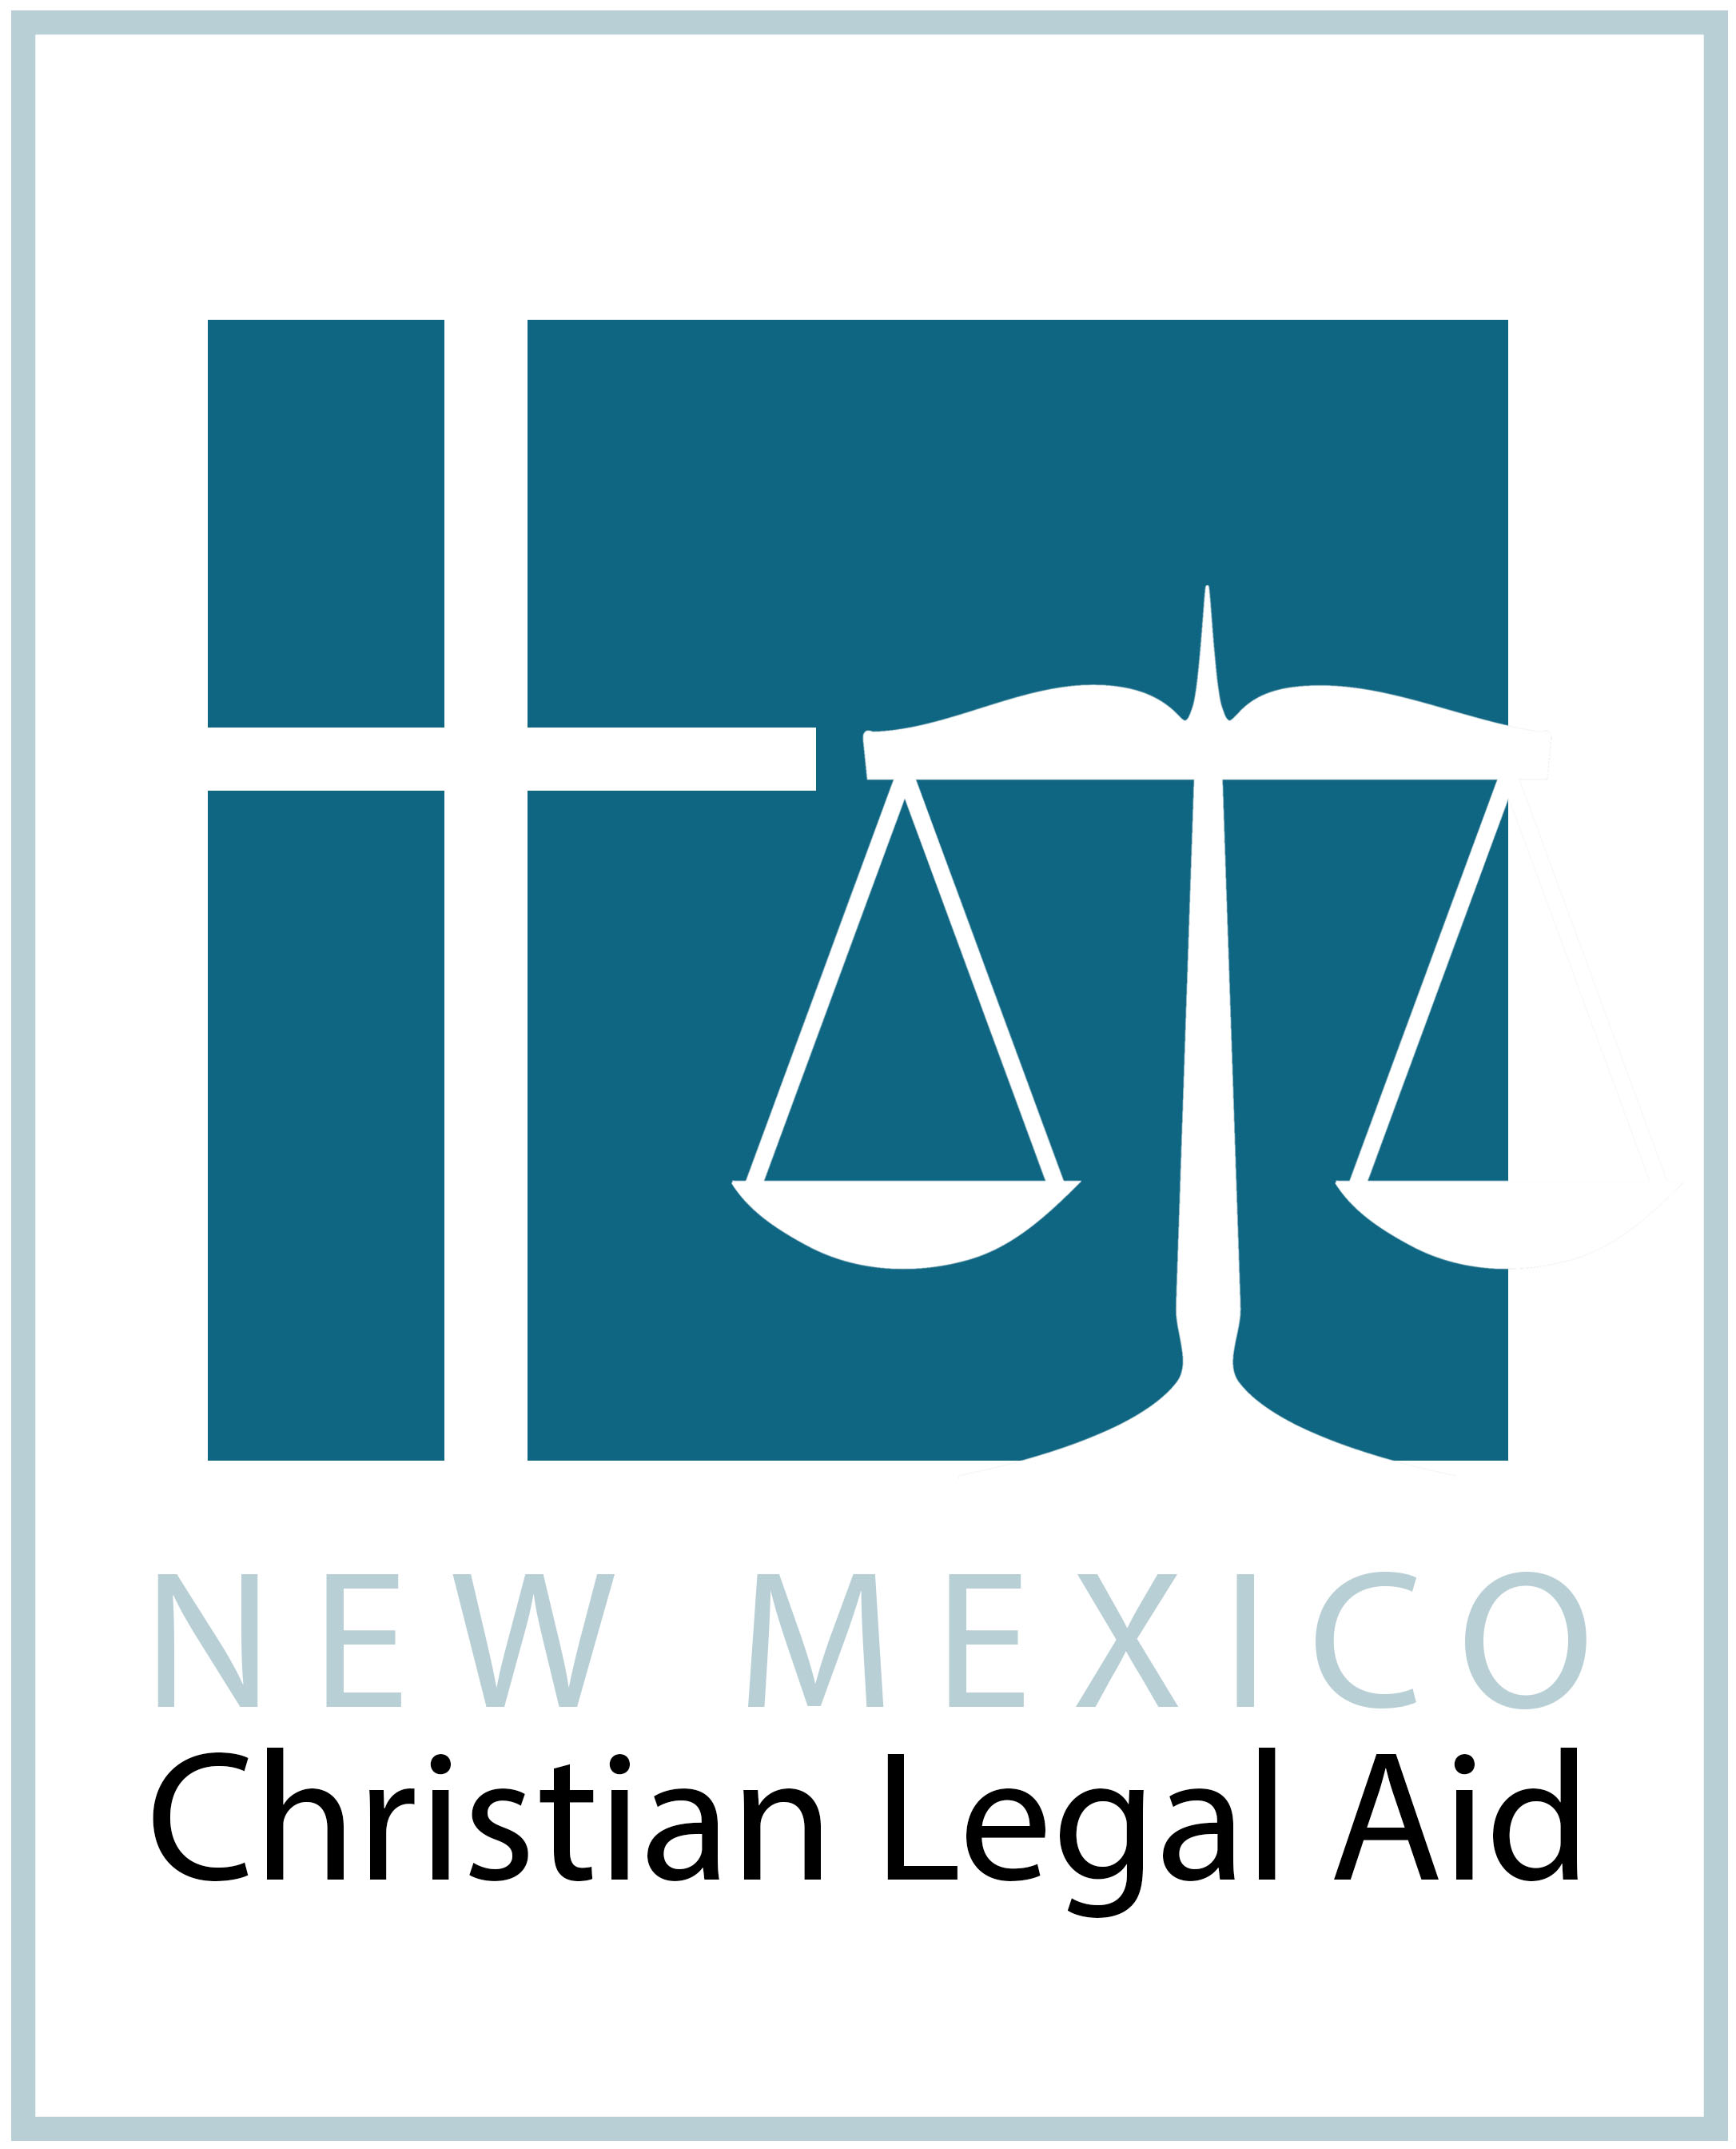 New Mexico Christian Legal Aid<br />Who We Are and What We Do